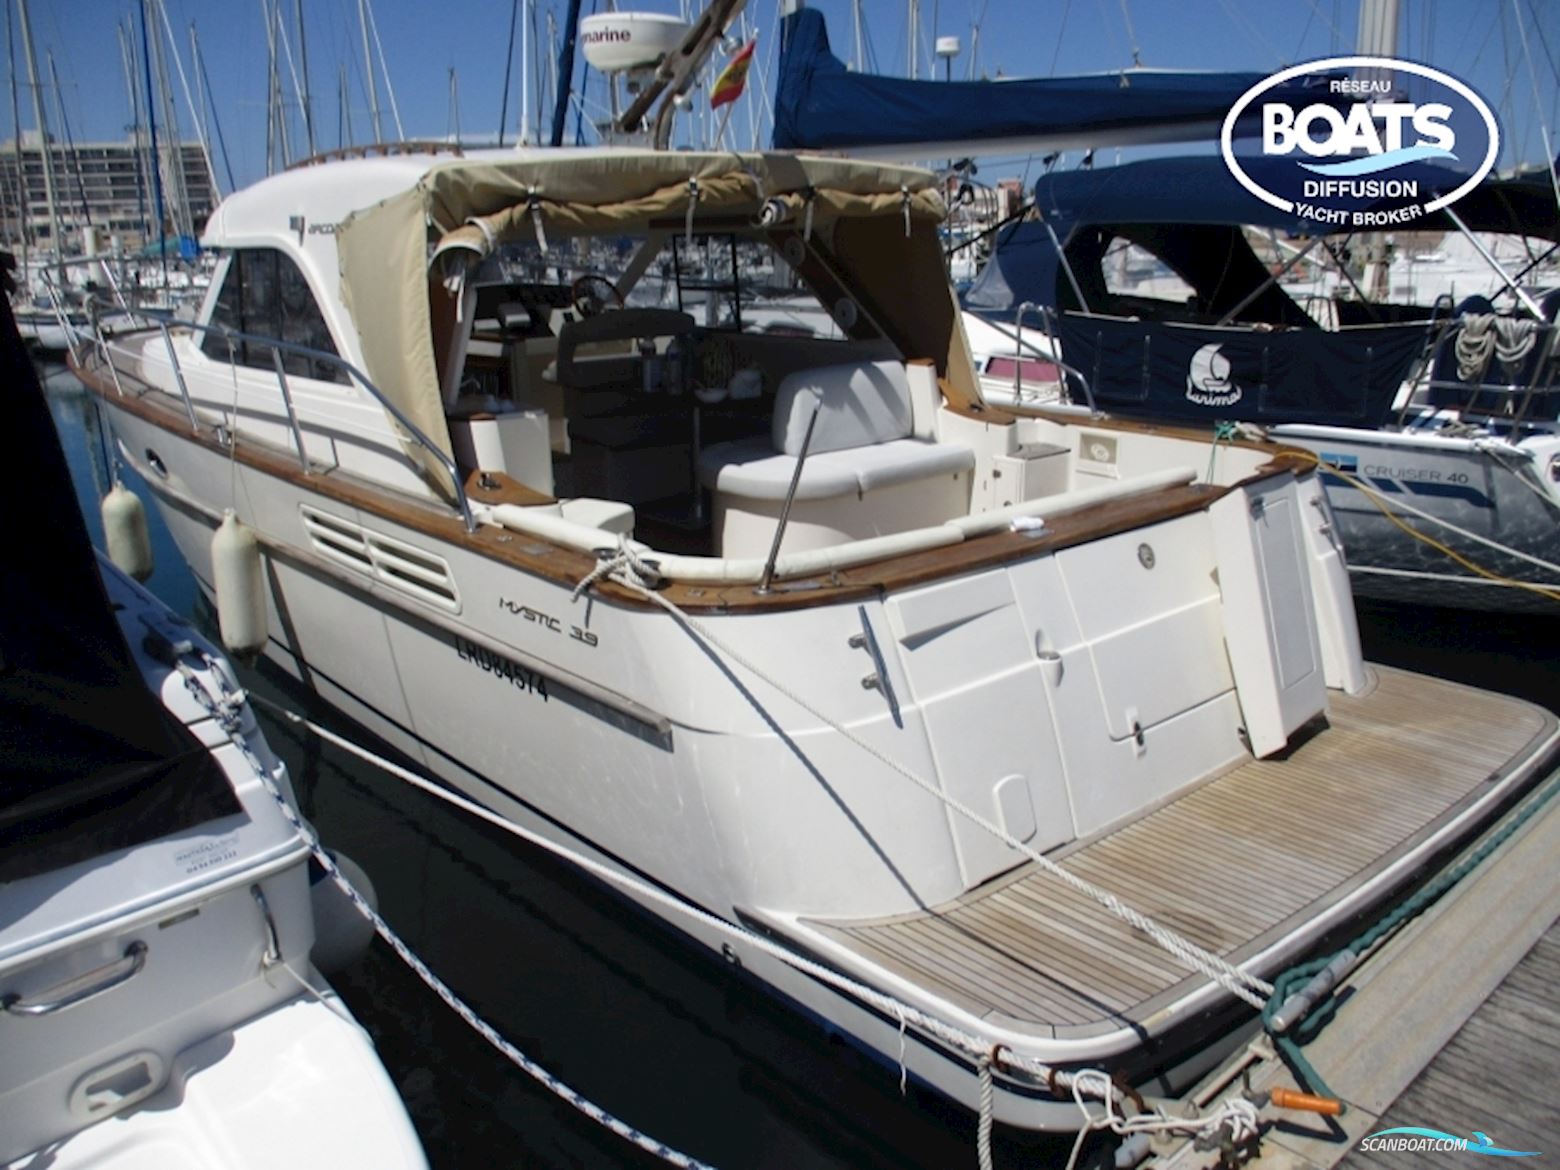 Arcoa Mystic 39 Motor boat 2007, with Volvo D4 engine, France